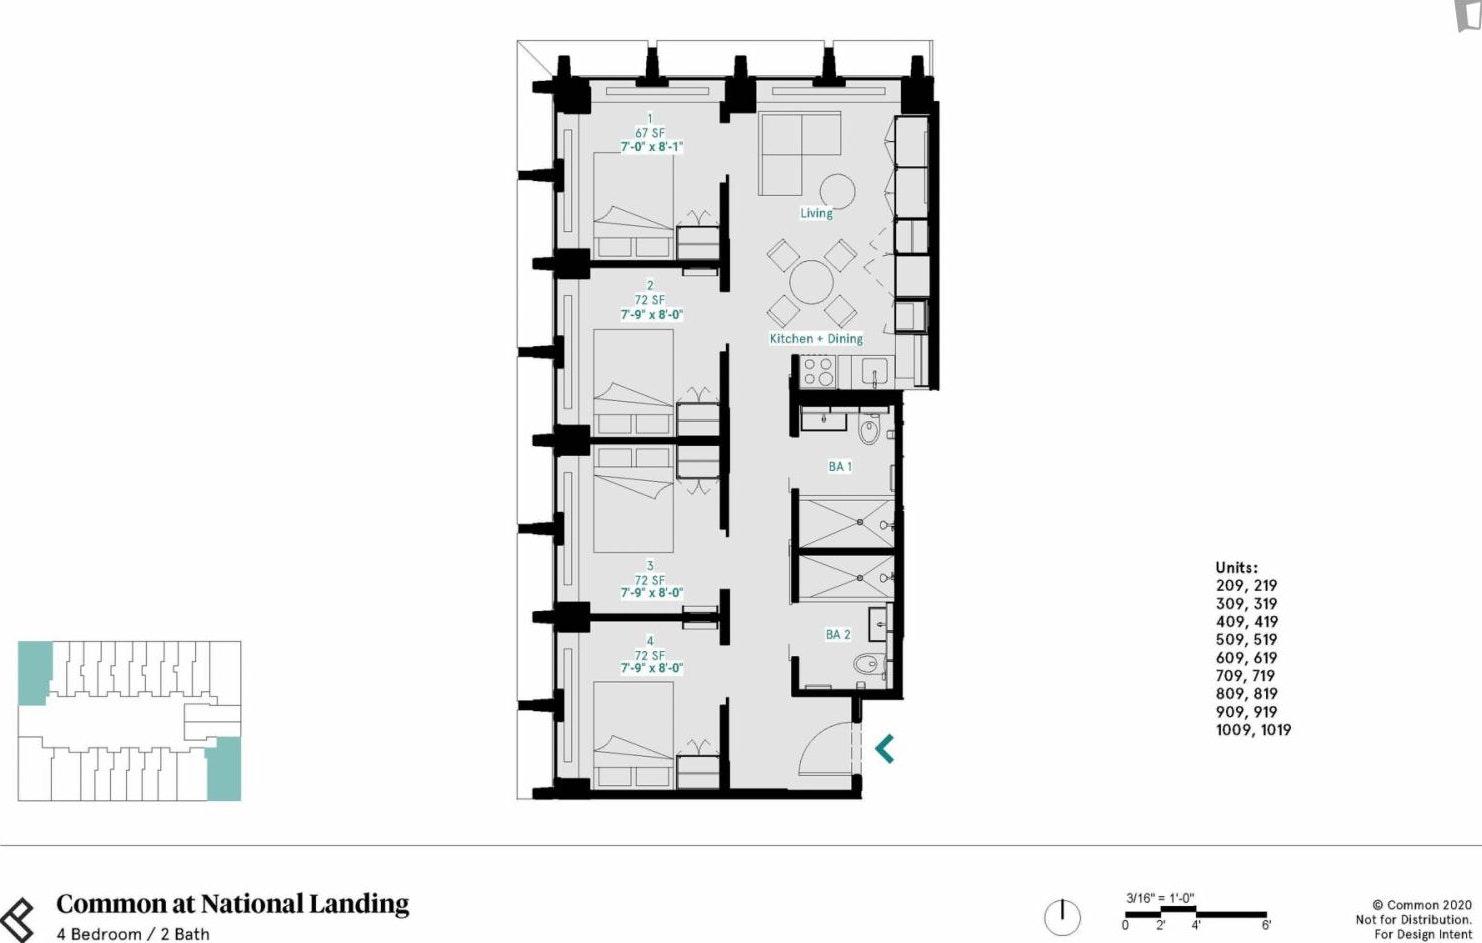 Amazing Double Bedroom near 23rd and Crystal